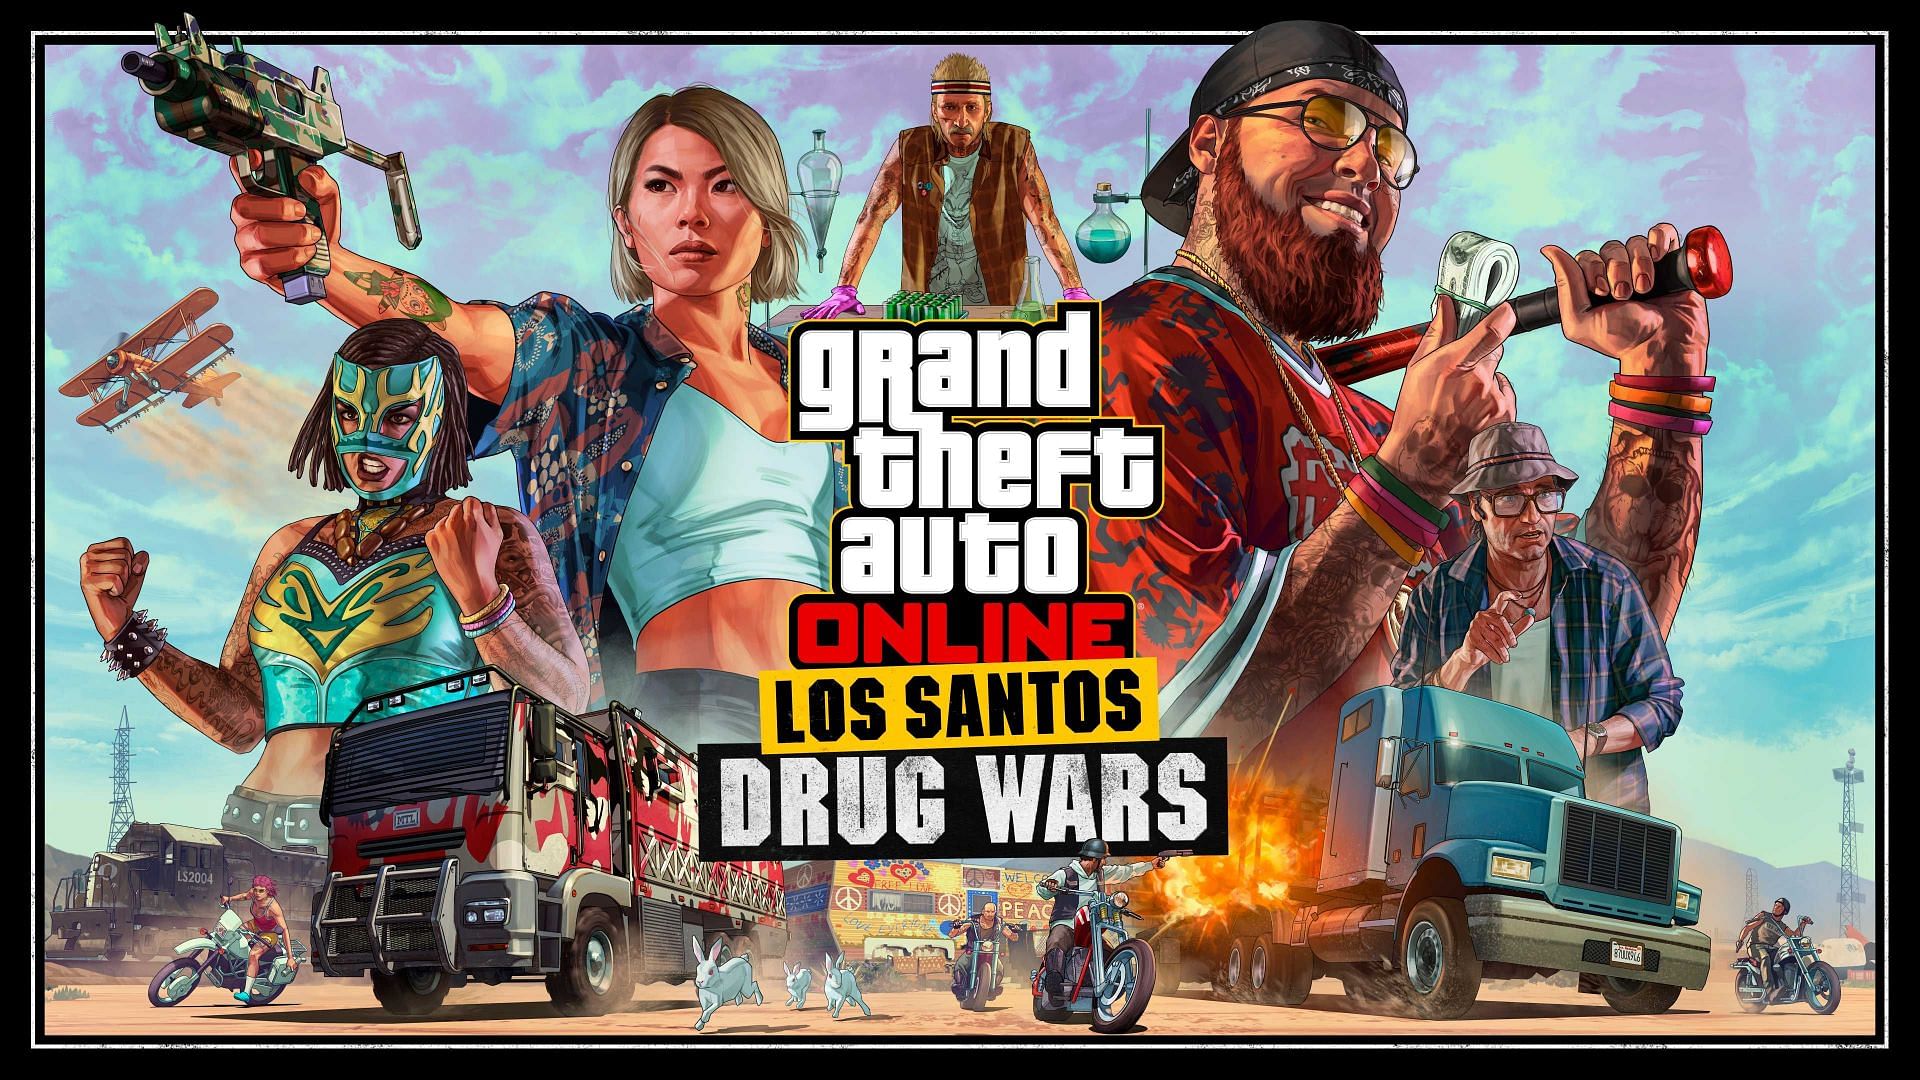 Official artwork for the new update (Image via Rockstar Games)